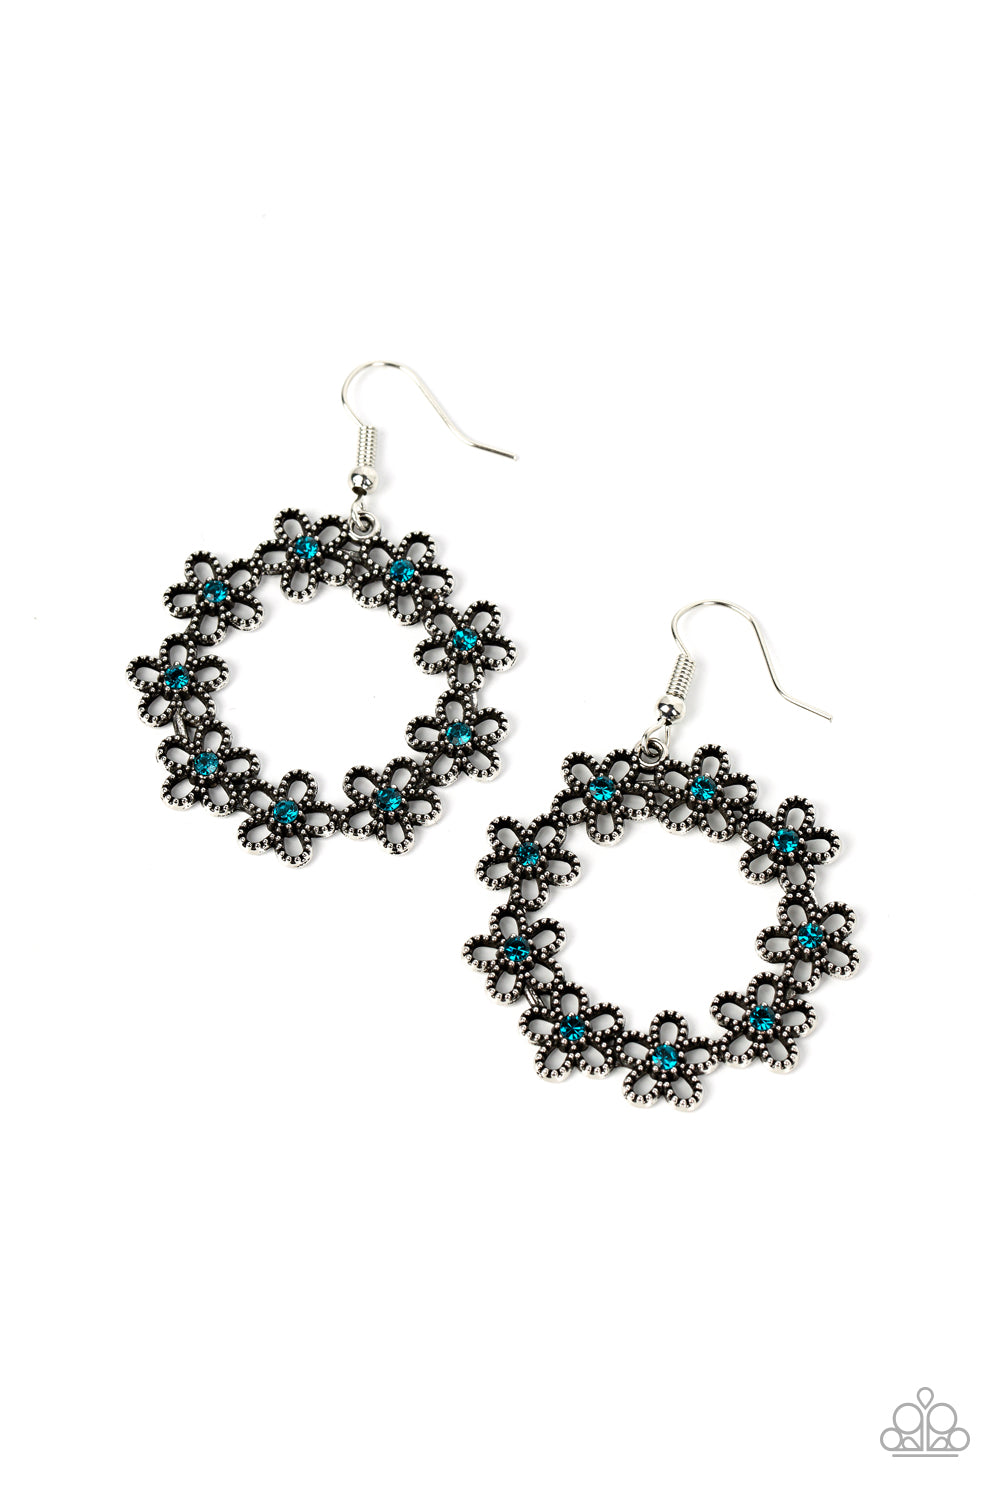 five-dollar-jewelry-floral-halos-blue-earrings-paparazzi-accessories